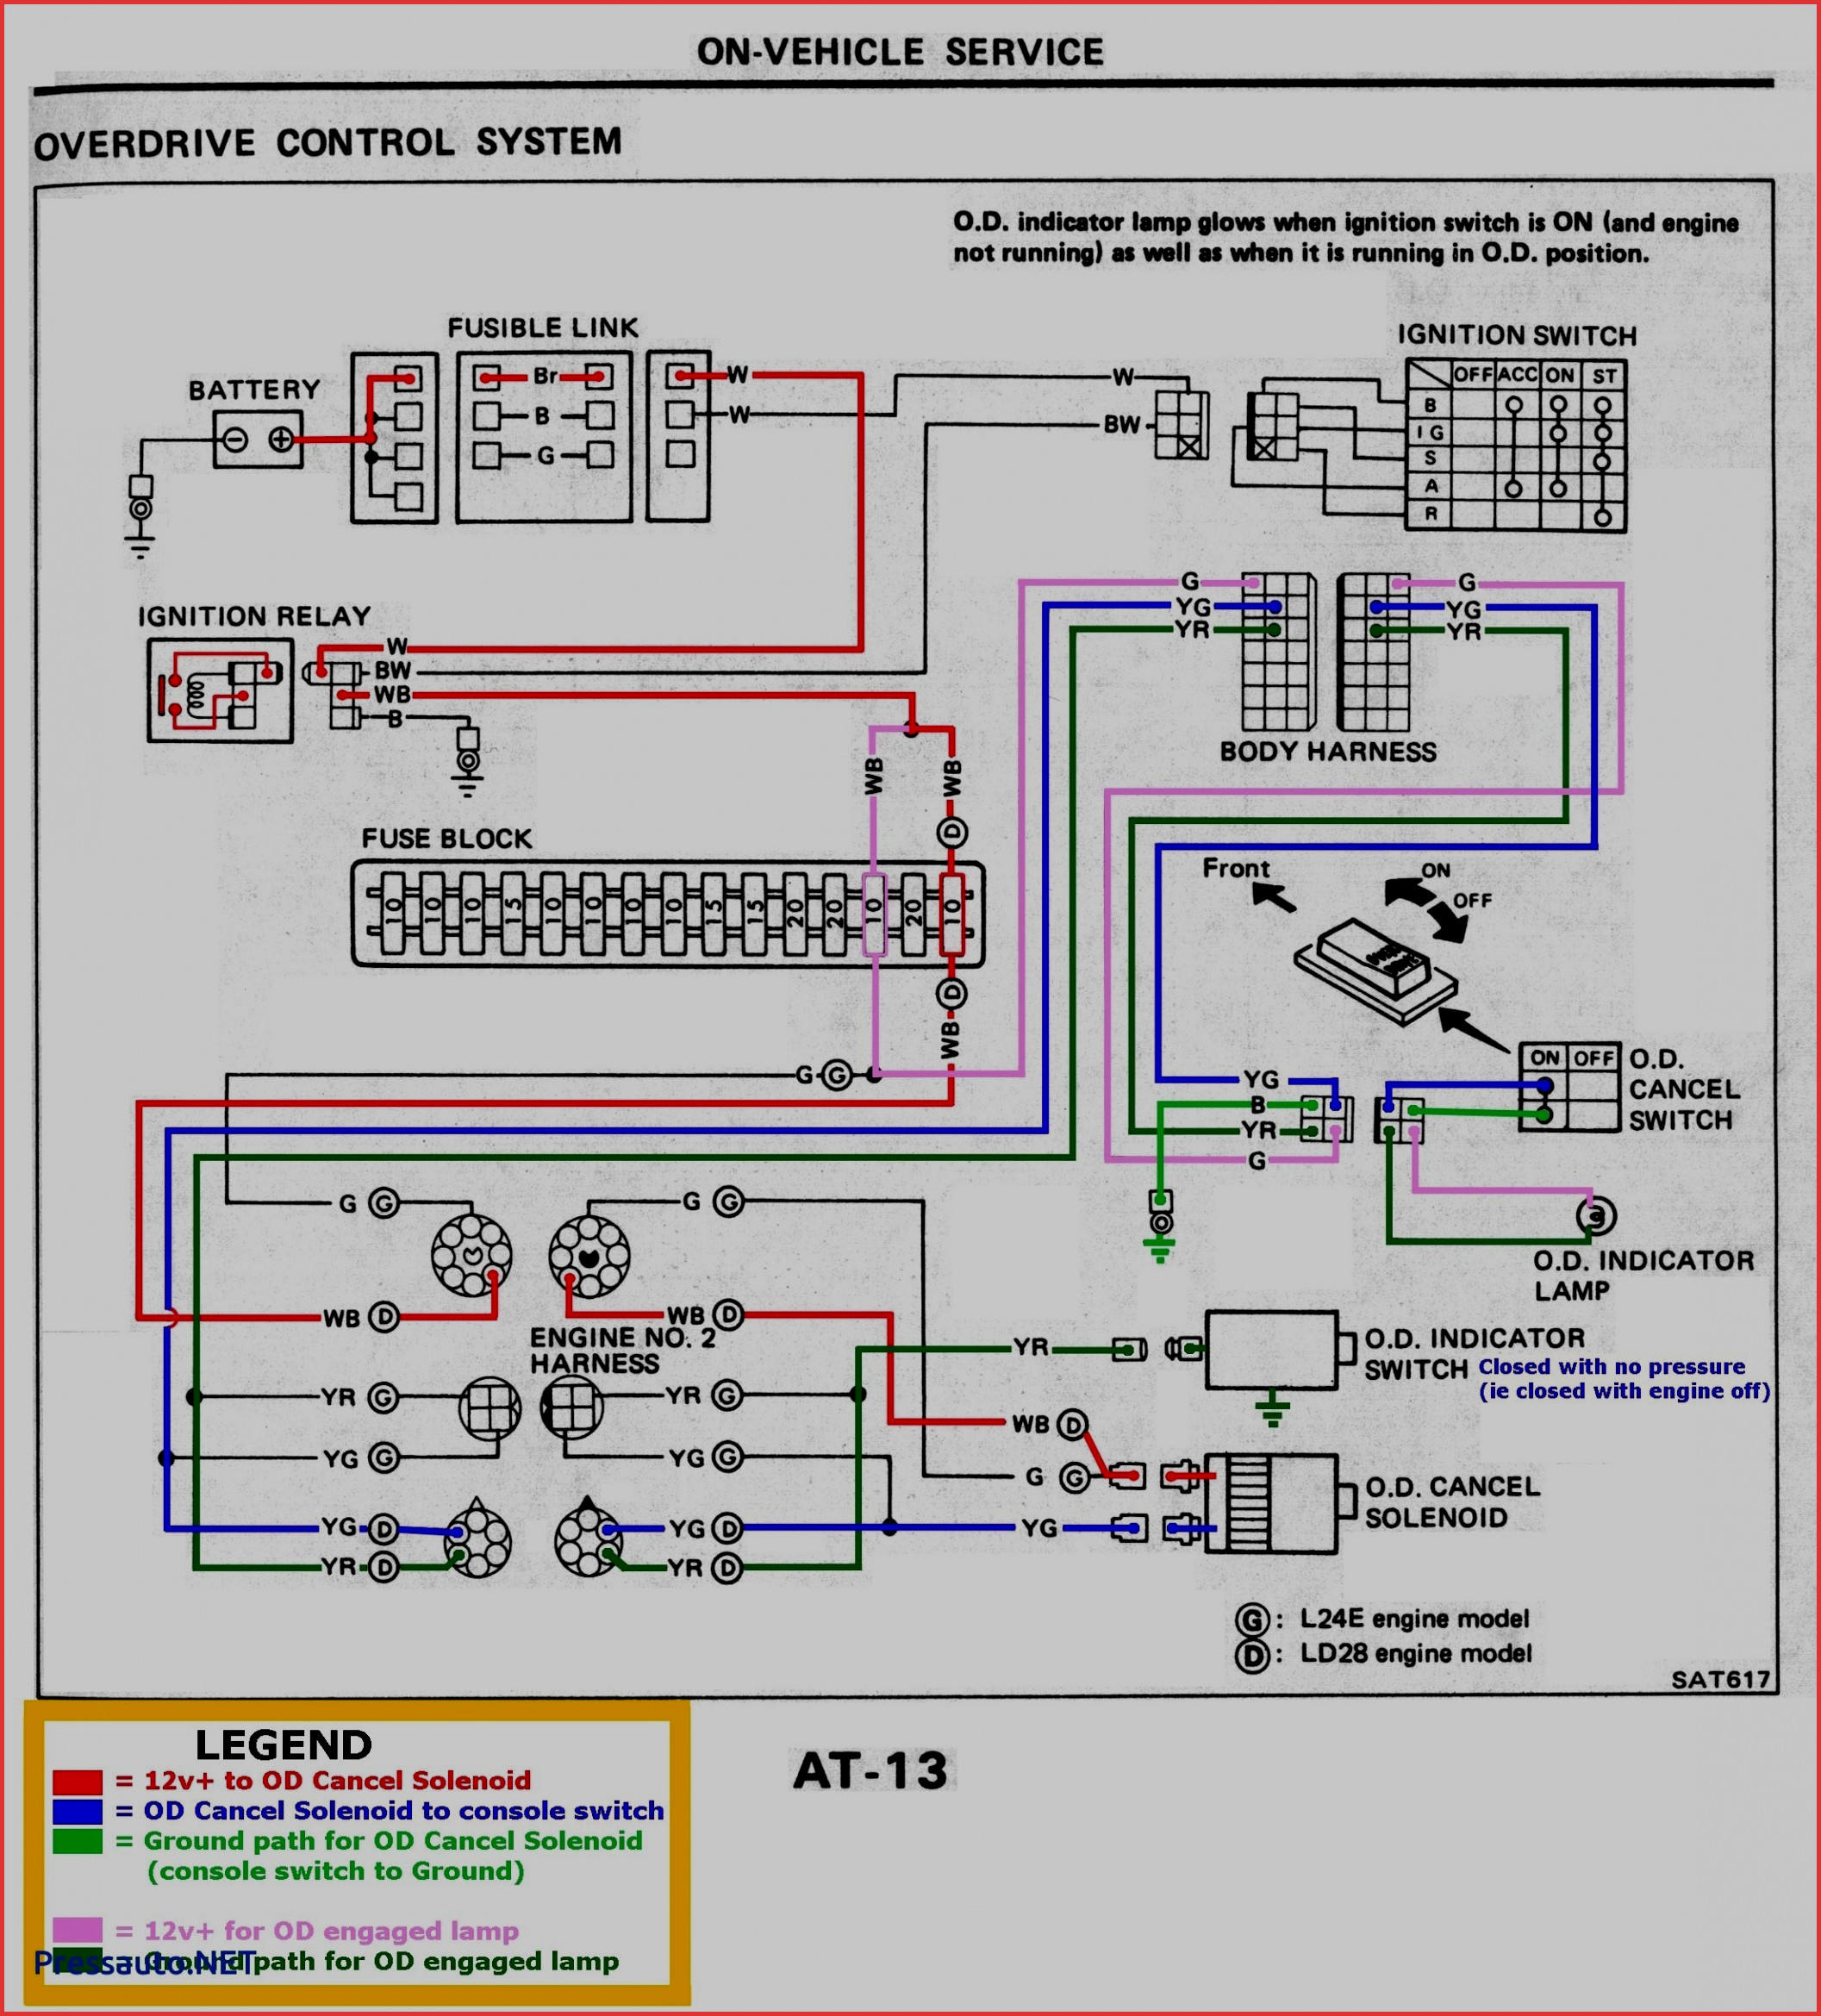 Uk Outlet Diagrams - Trusted Wiring Diagram - Gfci Outlet Wiring Diagram